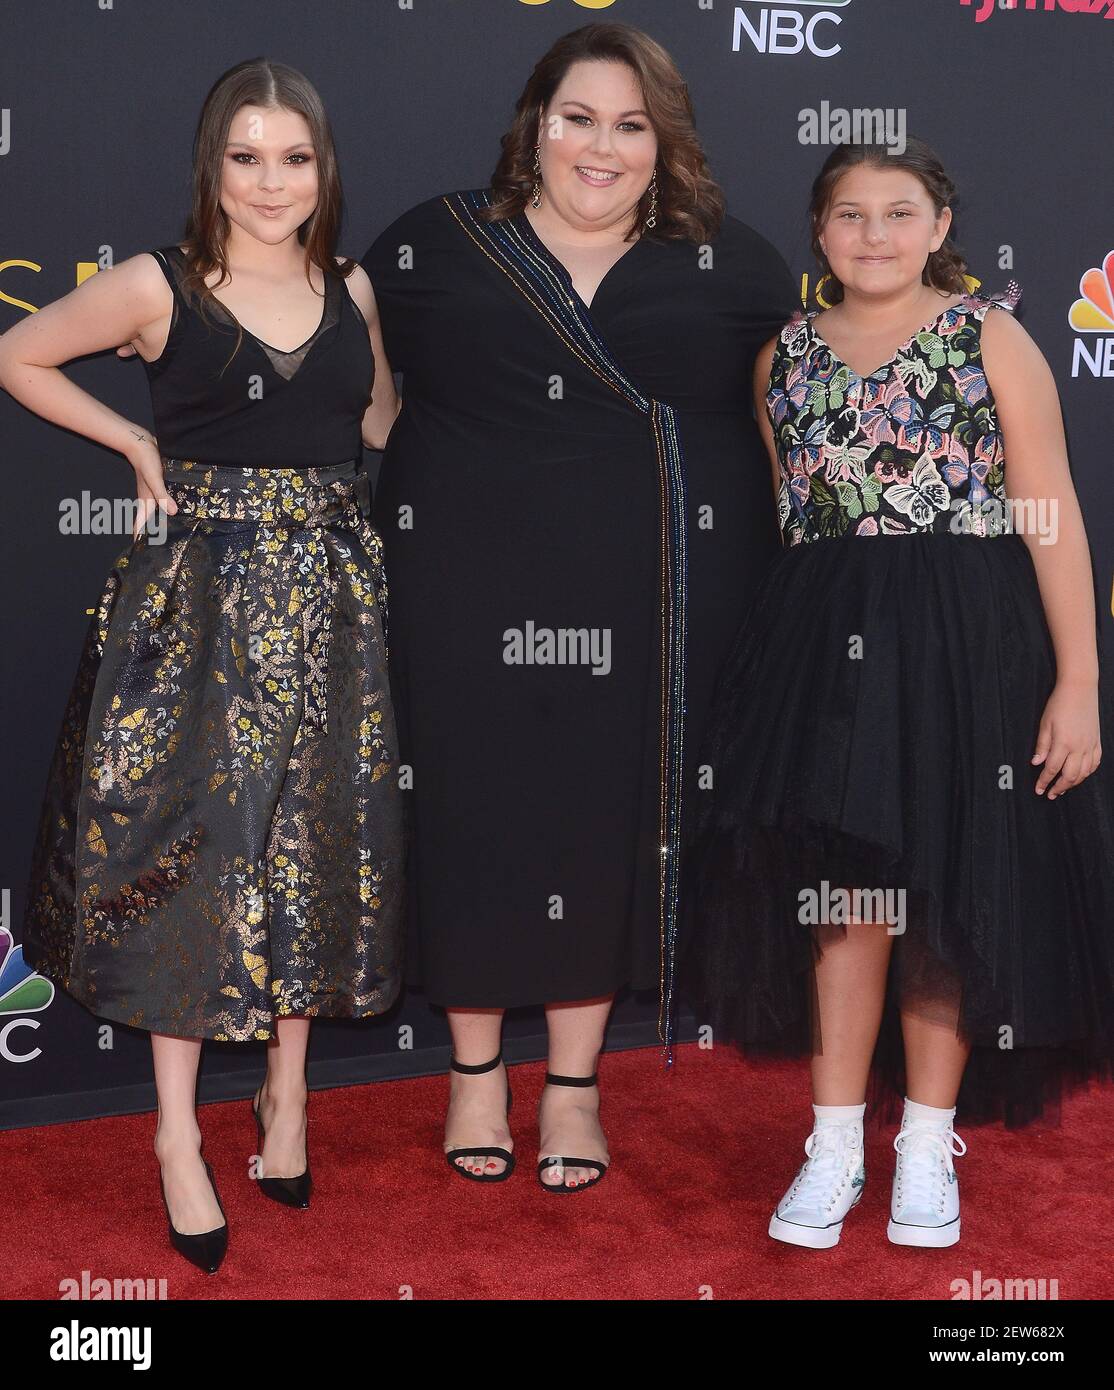 HOLLYWOOD- SEPTEMBER 26: Chrissy Metz, Mackenzie Hancsicsak and Hannah Zeile  at the premiere of NBC's "This